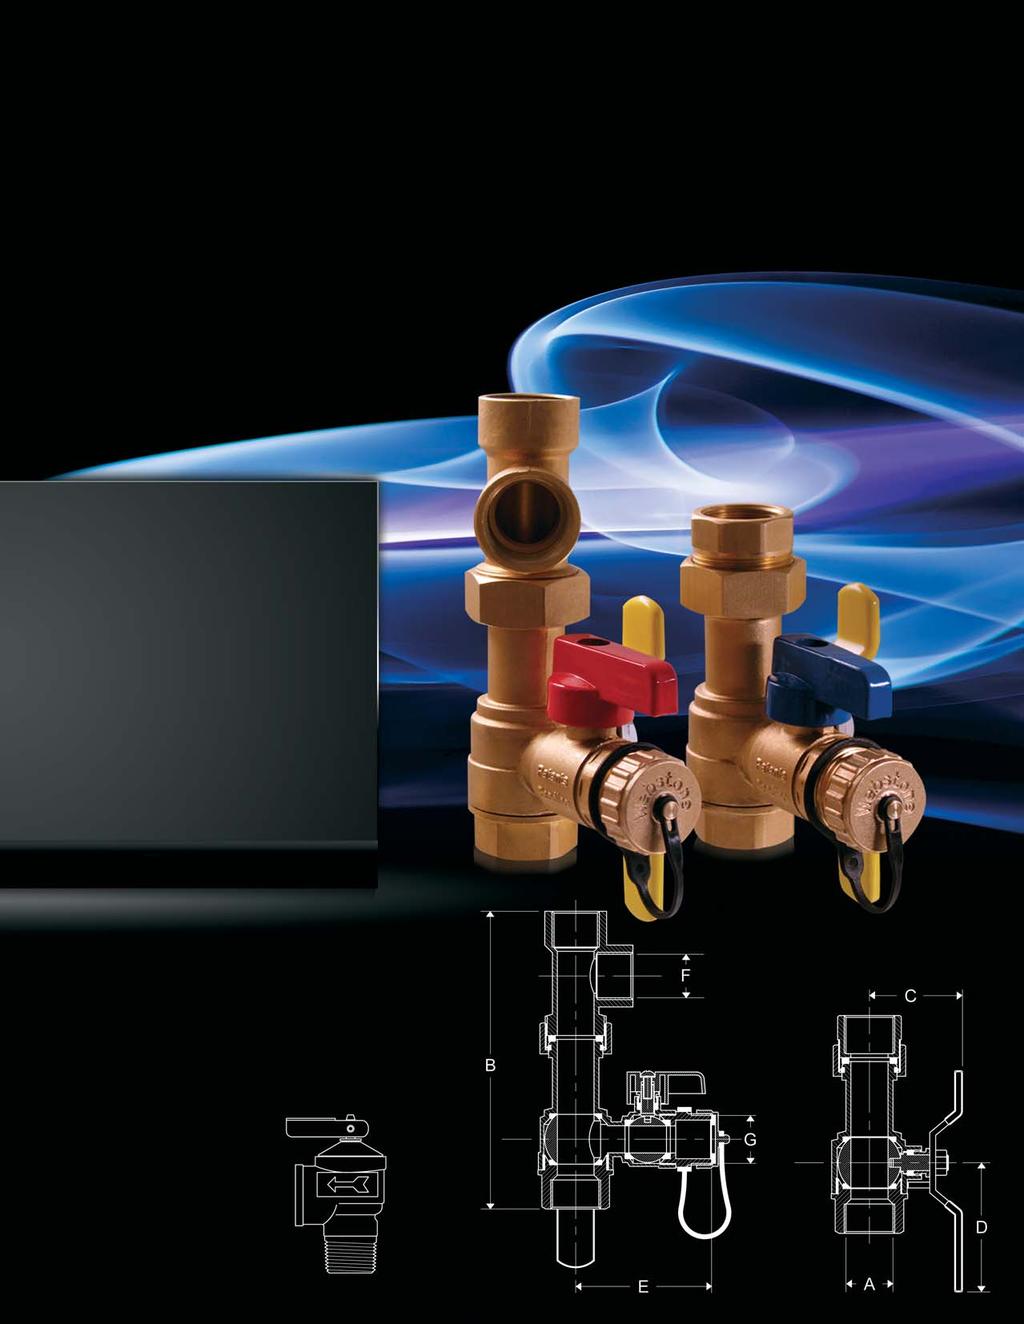 Heavy duty forged brass with full port main fl ow channel Performs all of the same functions of our original E-X-P Packaged with pressure relief valve for residential use (00,000 BTU) Uniquely